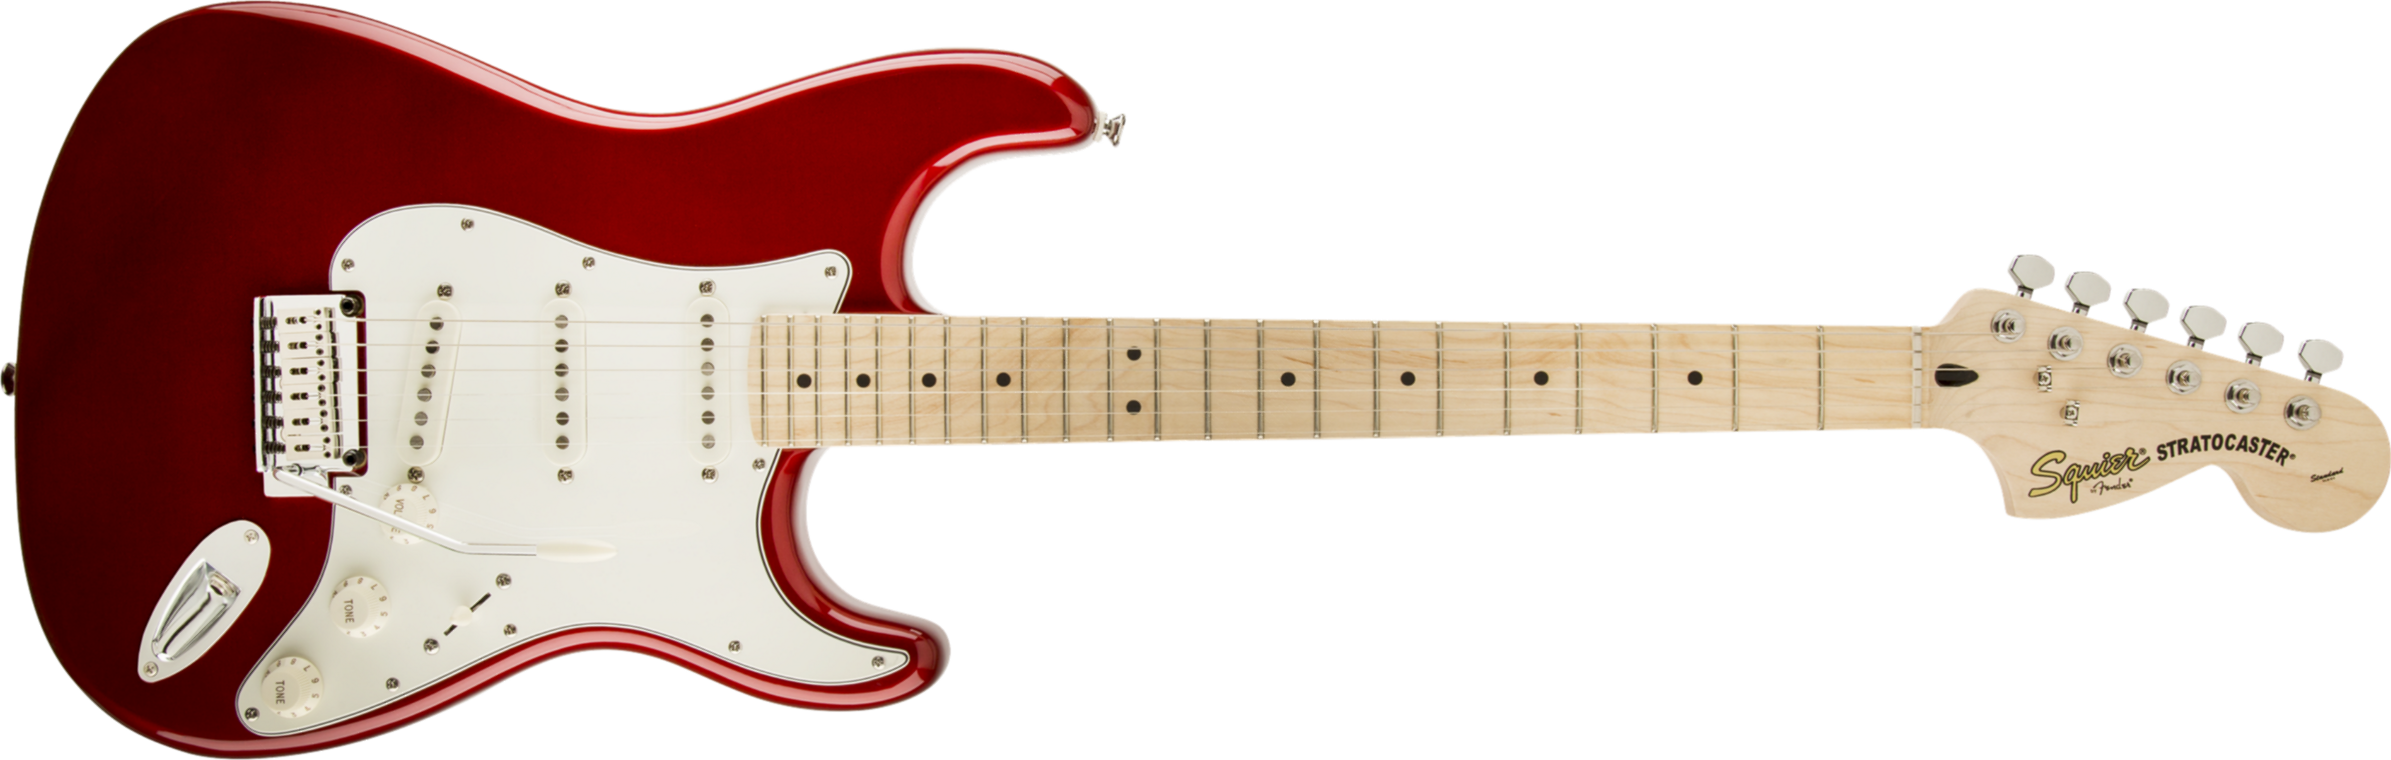 Squier Strat Standard Mn - Candy Apple Red - Str shape electric guitar - Main picture